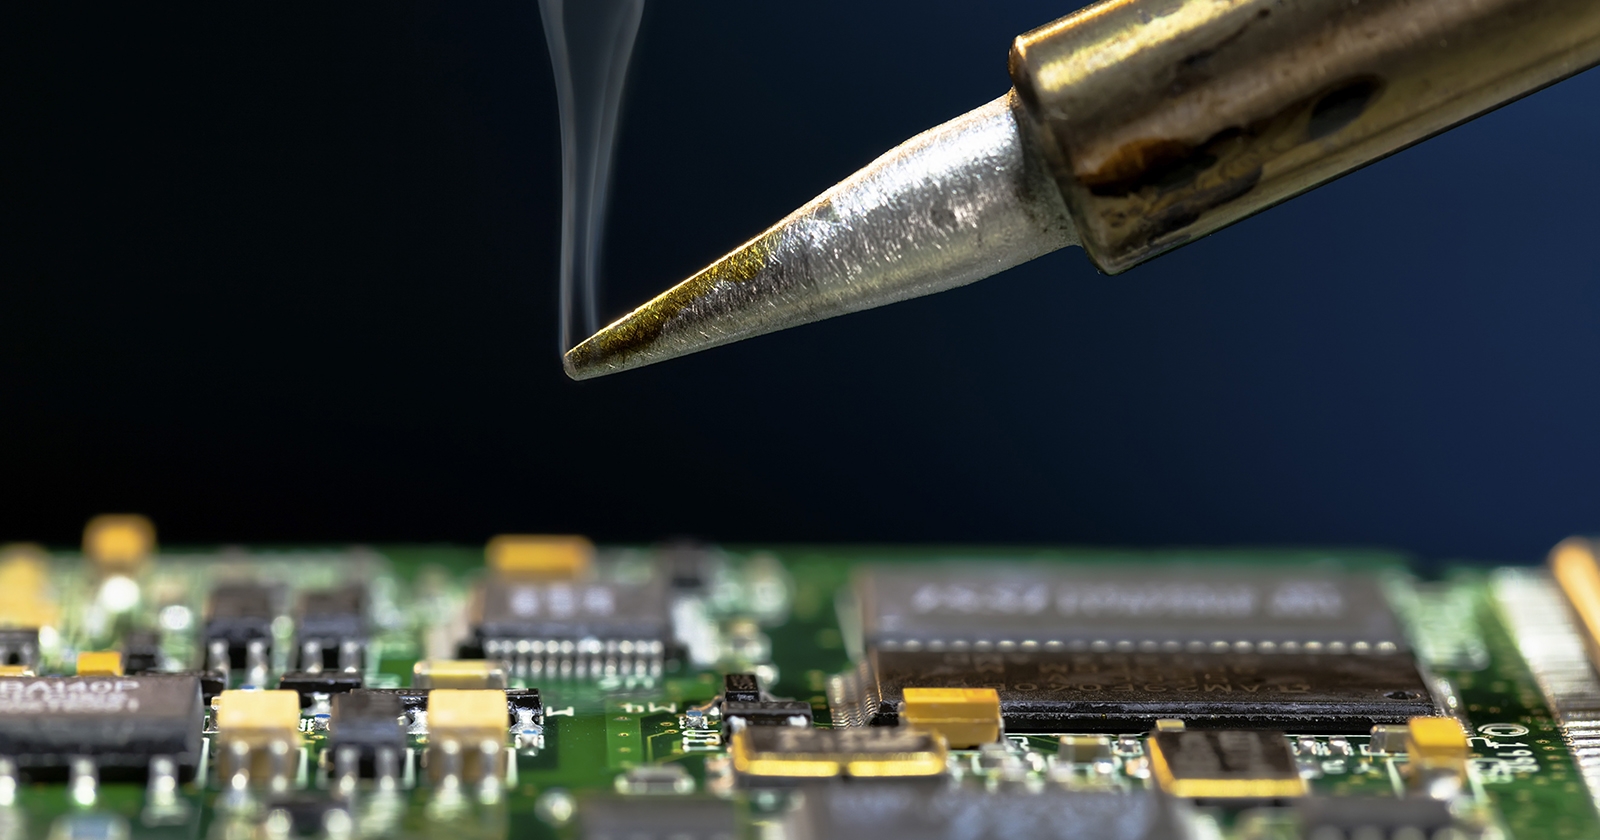 An expert analyzes a circuit board. Exponent engineers provide expert analysis of discrete components & printed circuit boards​